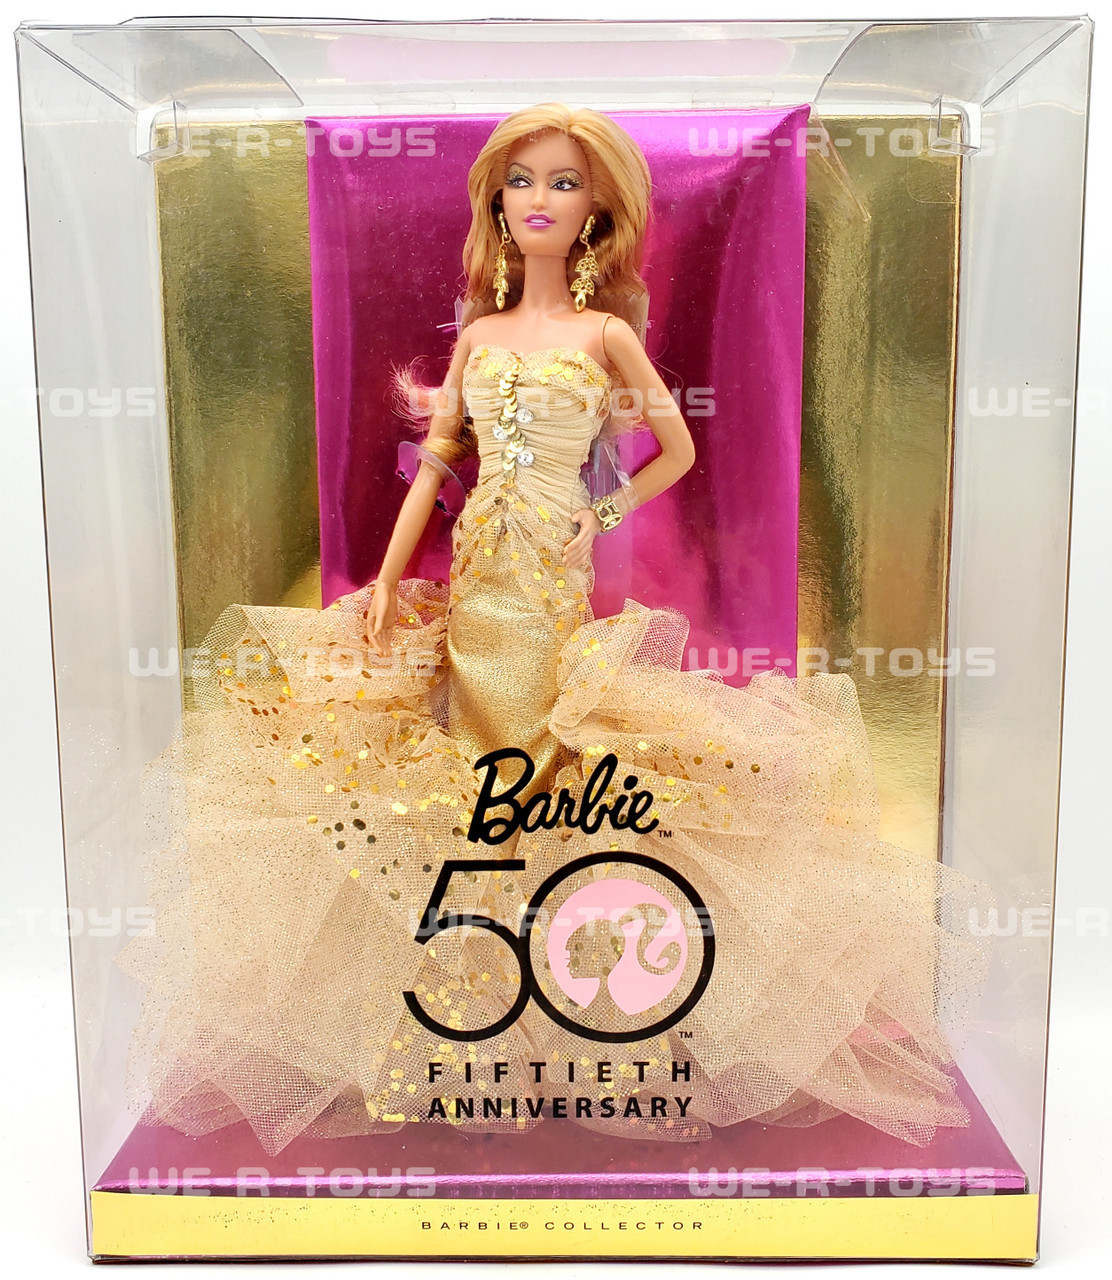 2008 Holiday Barbie Doll Barbie Collector Series - We-R-Toys